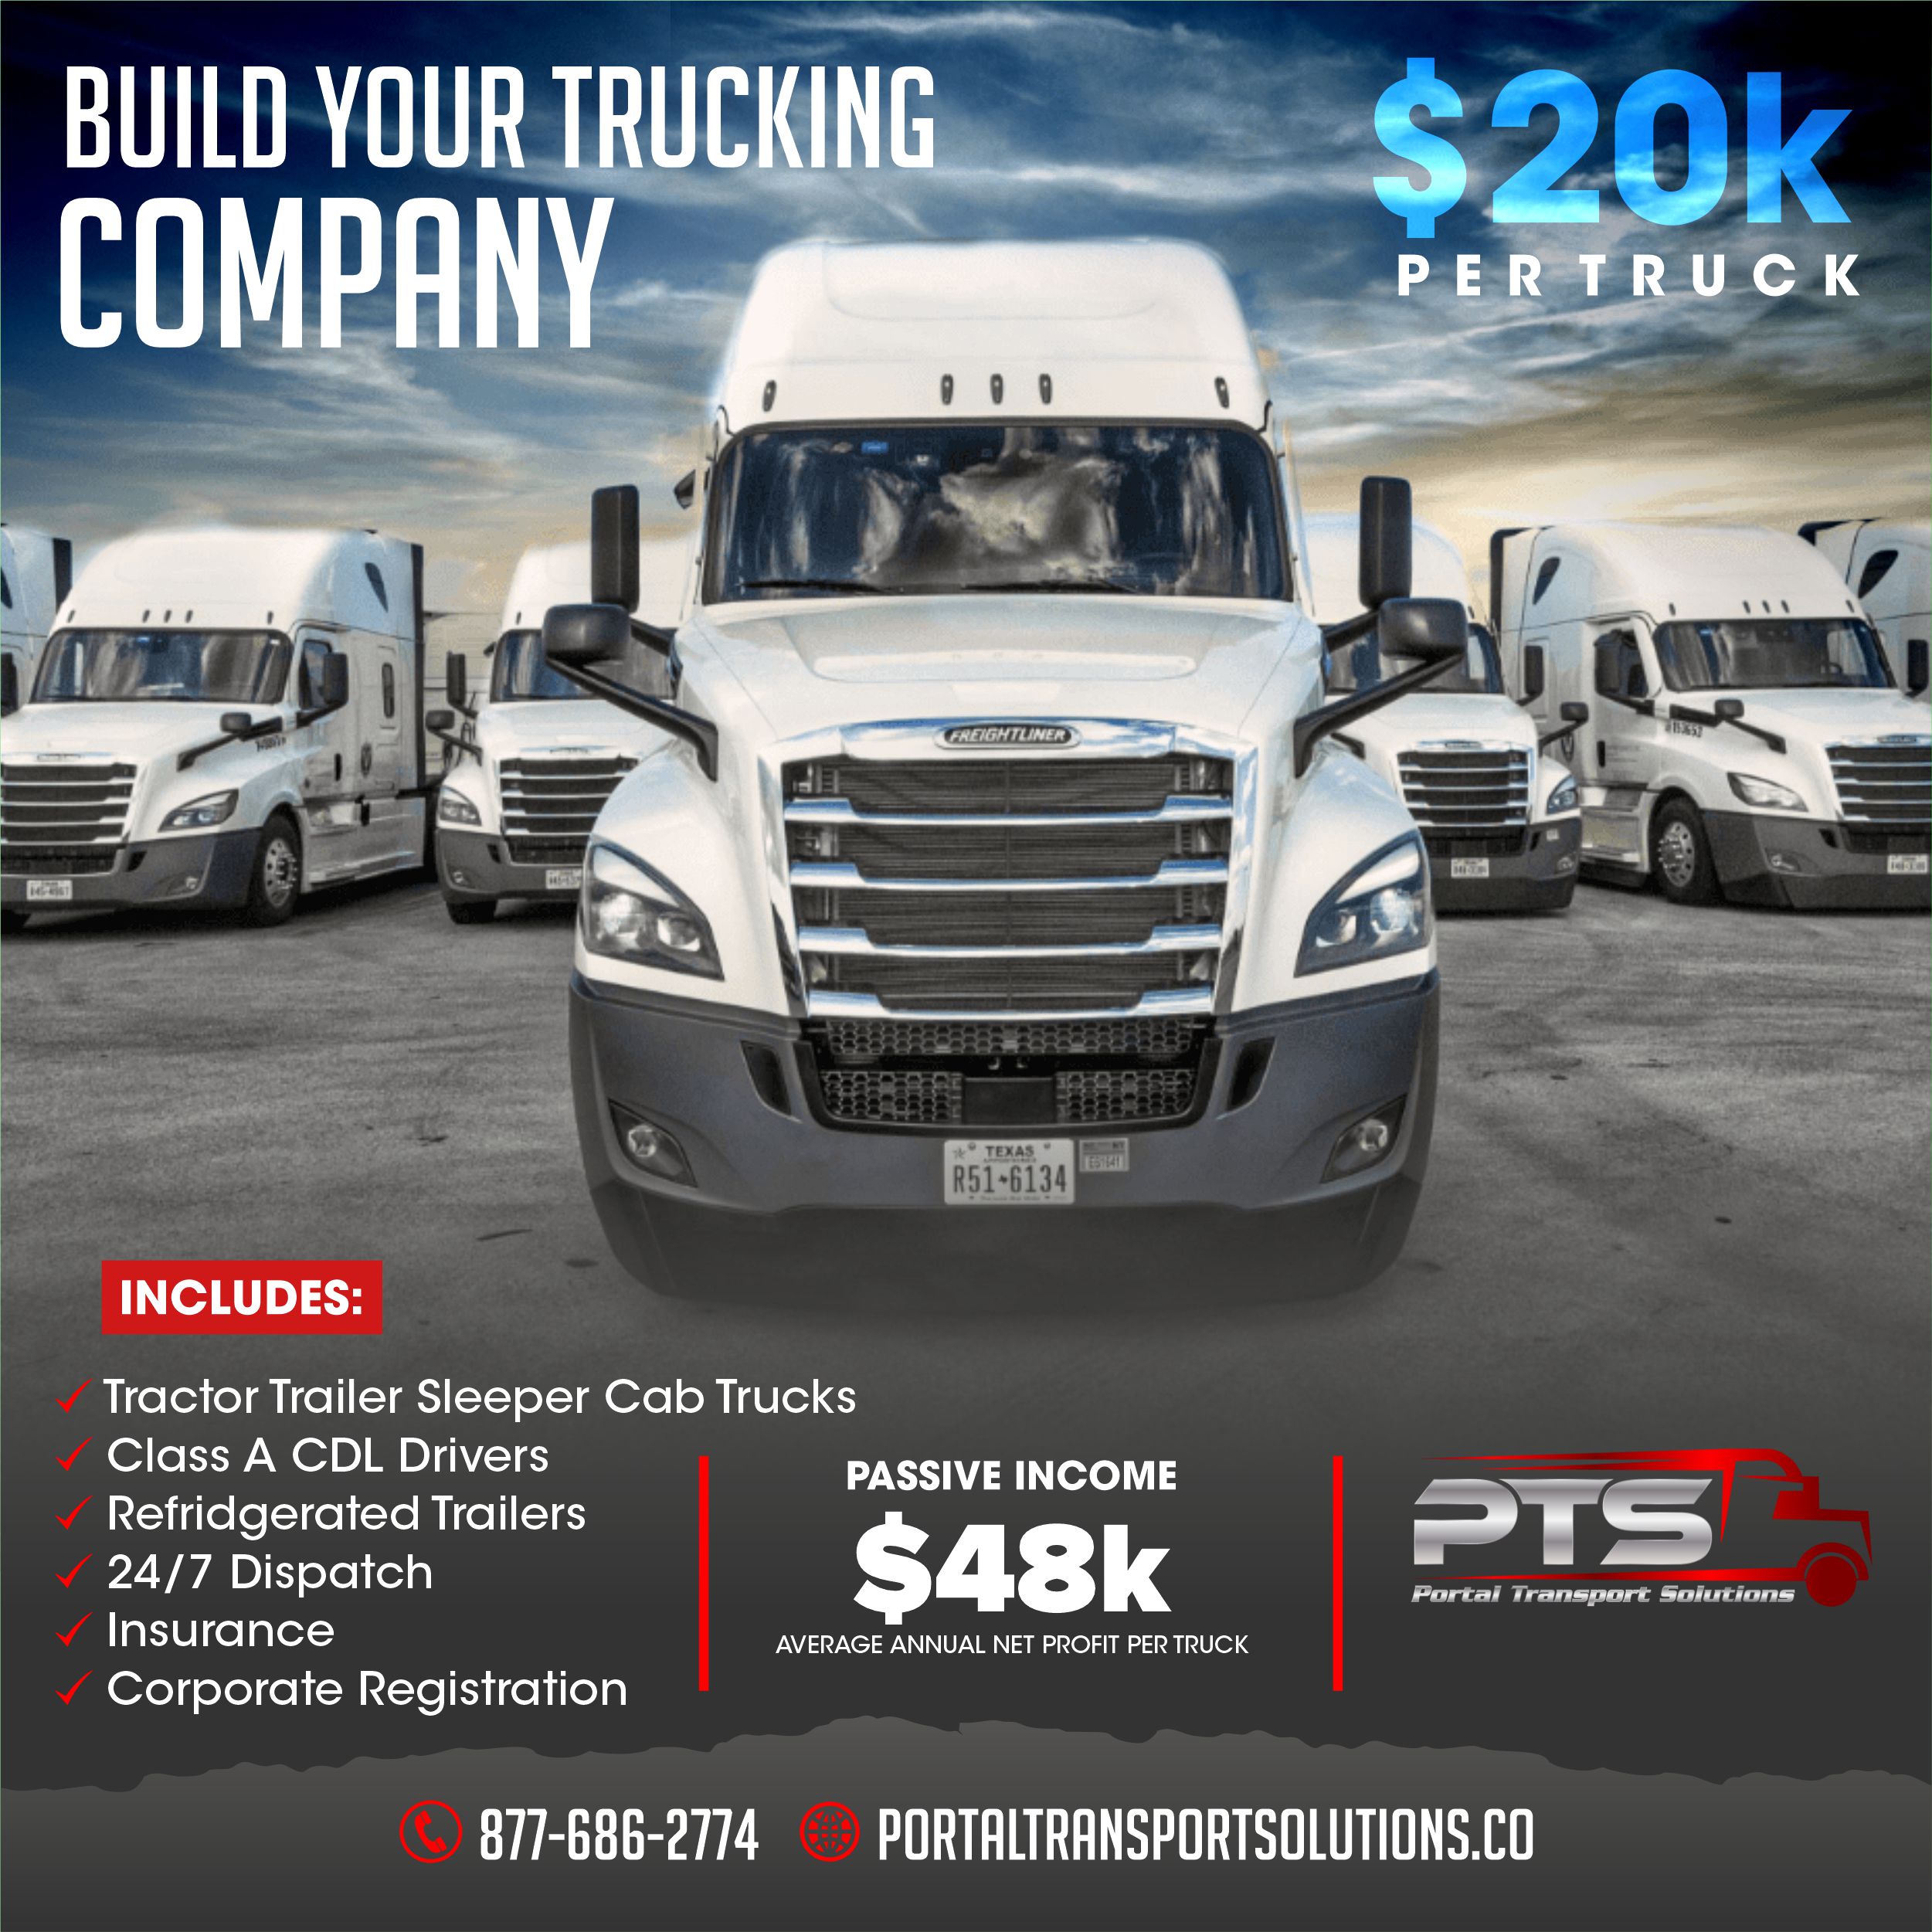 Revolutionizing Trucking: How Portal Transport Solutions is Paving the Way with Its Fleet Builder Program and Driver Staﬃng Services